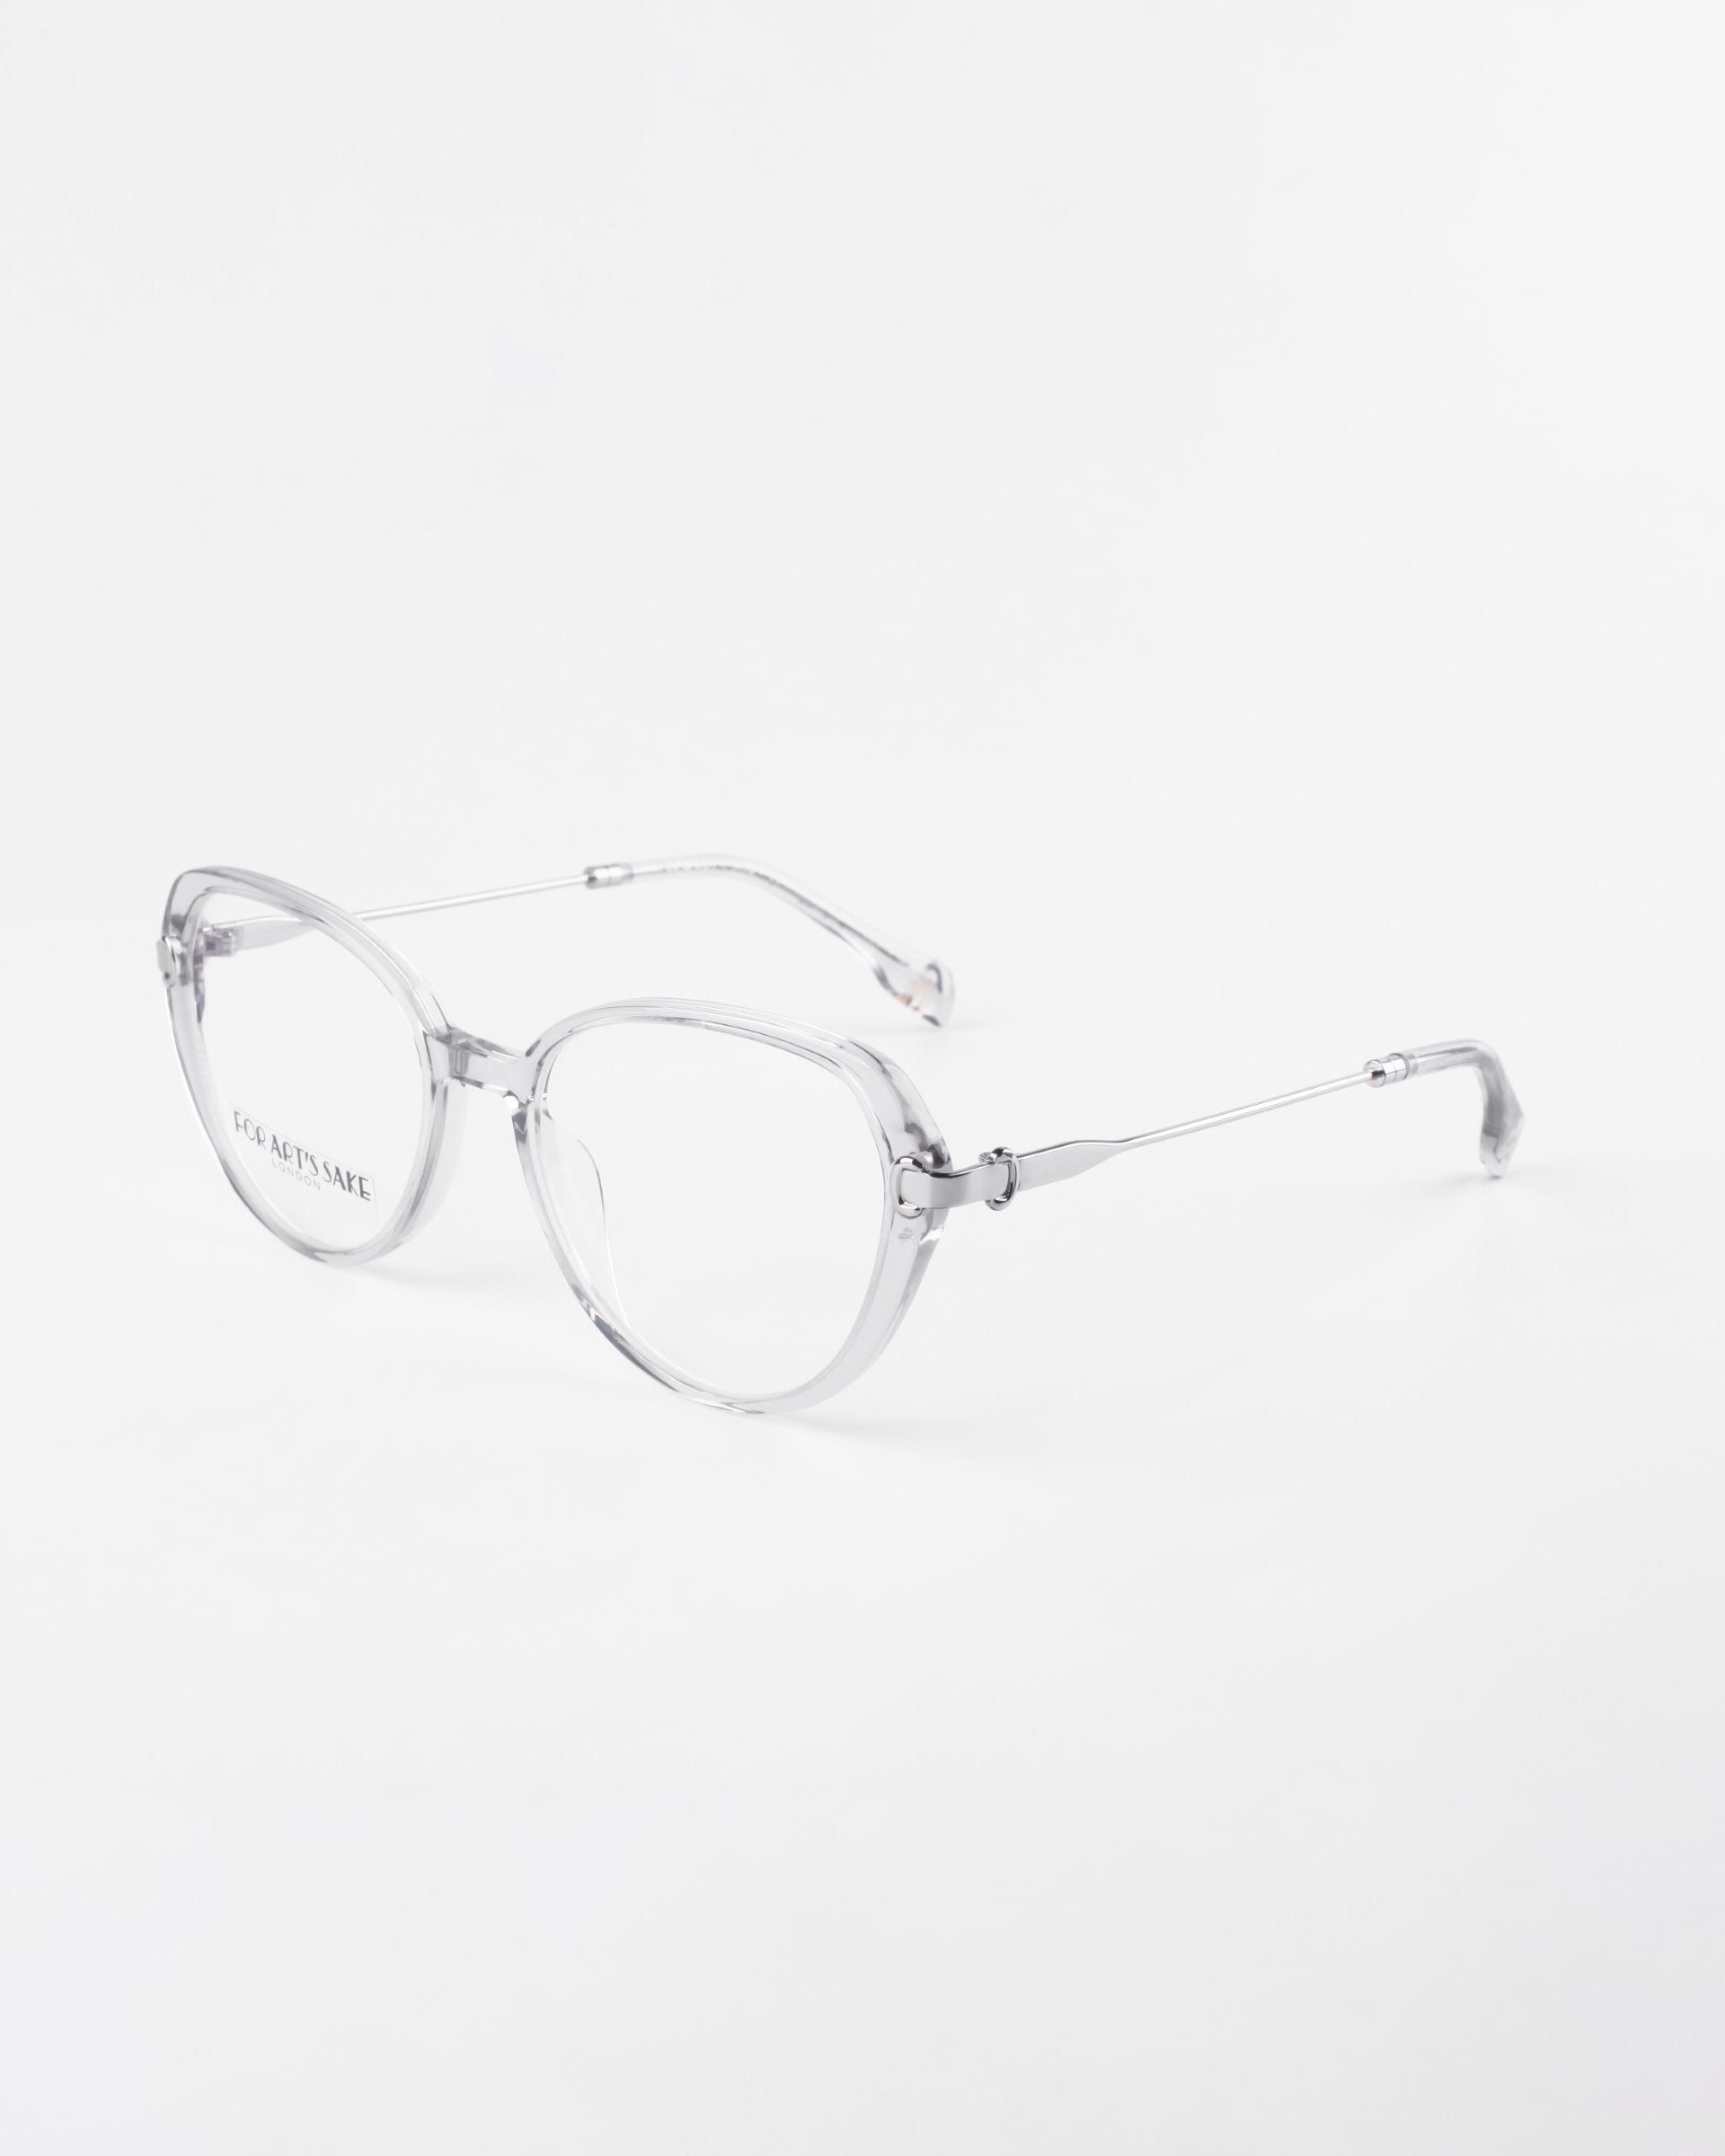 A pair of modern, transparent eyeglasses with round lenses and thin temples. The frame is clear, giving them a minimalist and stylish look. Featuring prescription lenses, the Waterhouse glasses by For Art&#39;s Sake® are set against a plain white background.